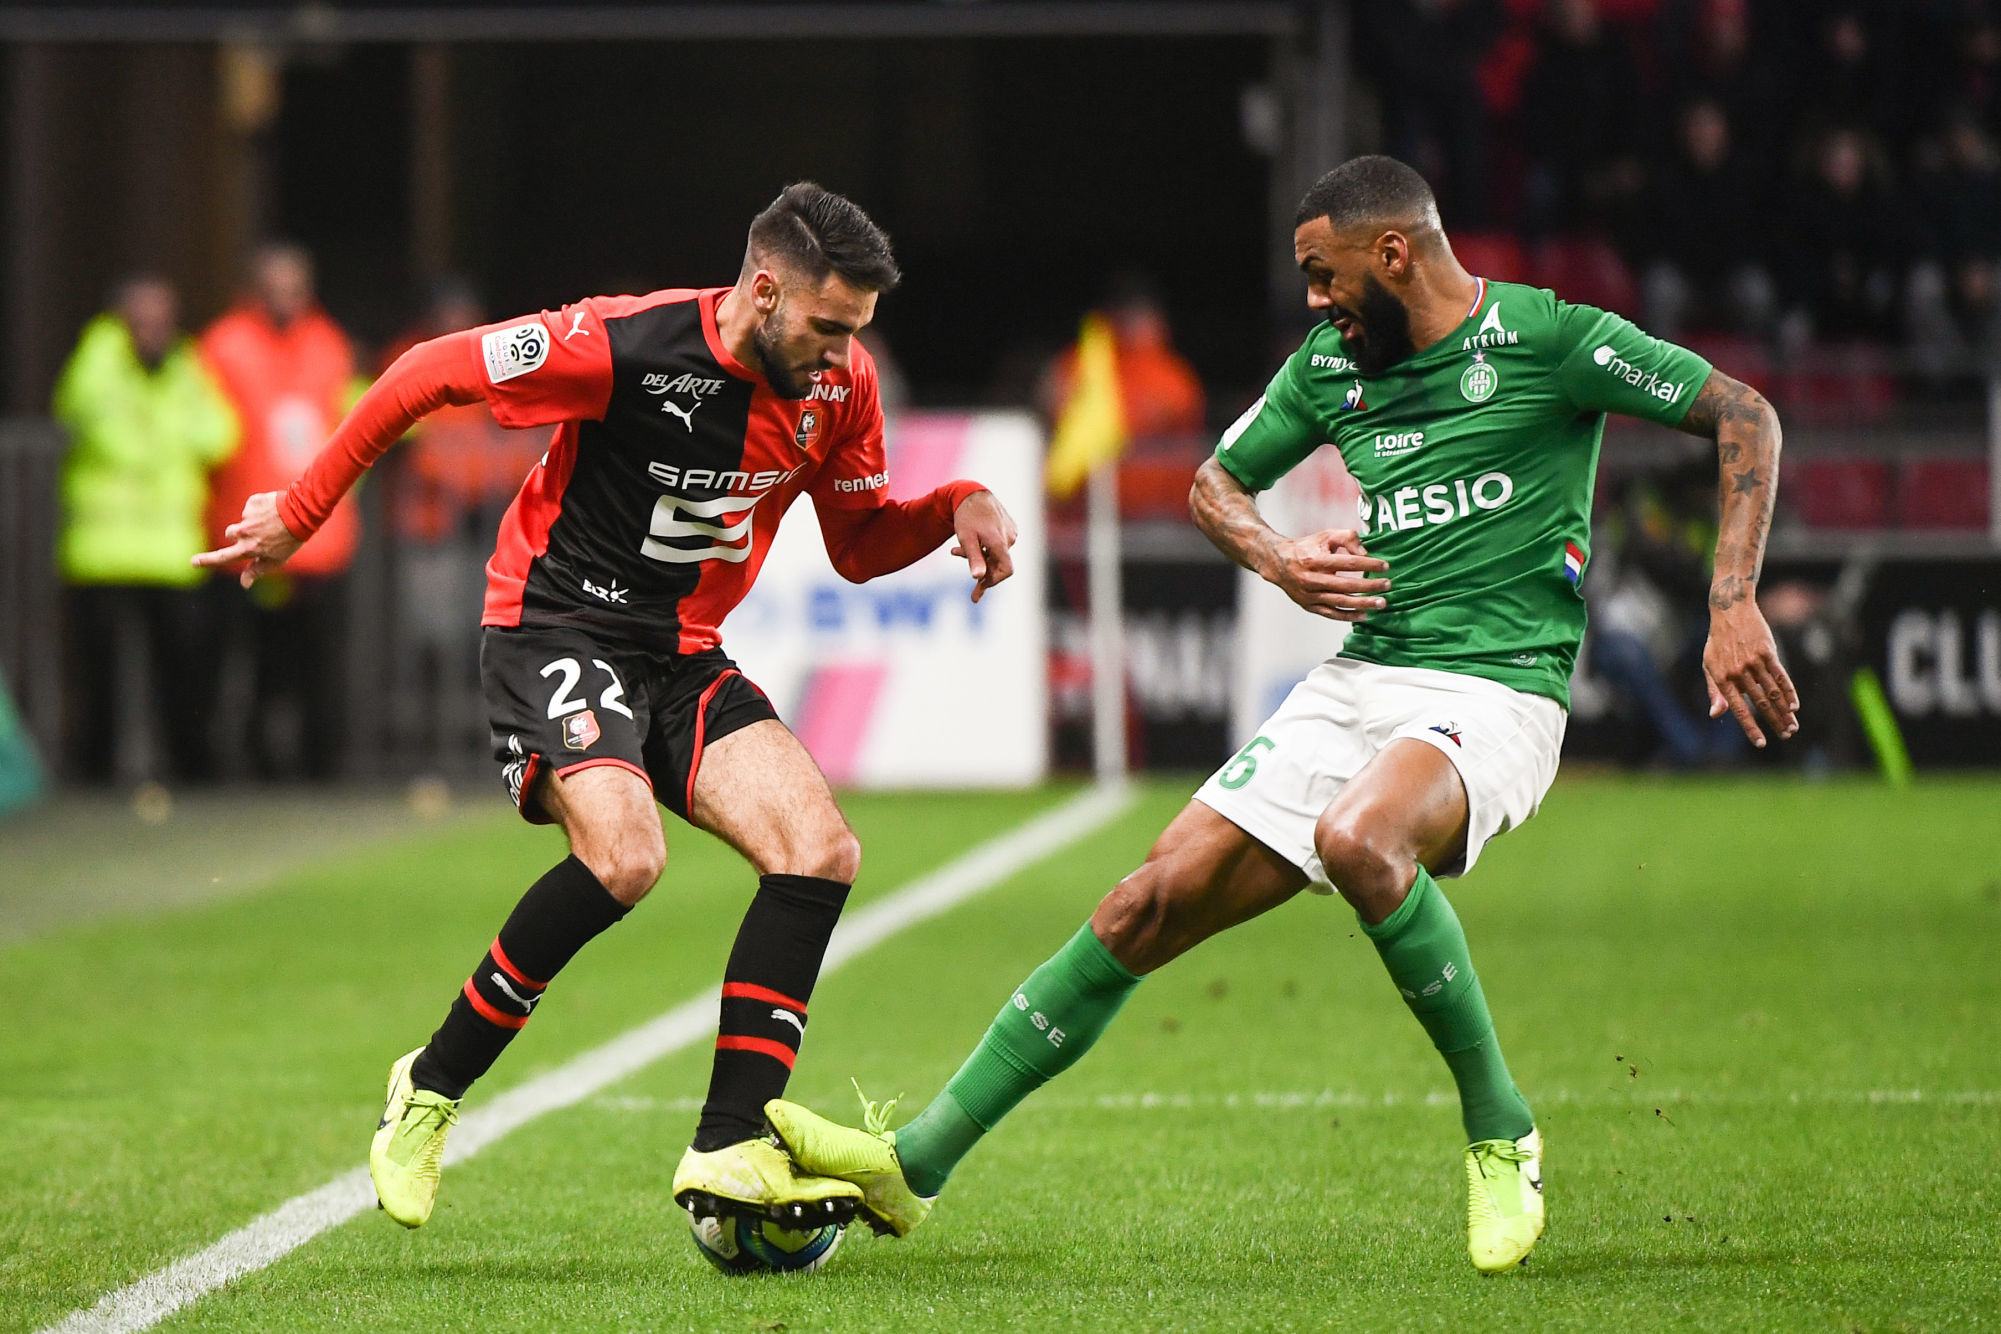 Romain DEL CASTILLO of Rennes and Yann M VILA of Saint Etienne during the Ligue 1 match between Rennes and Saint-Etienne at Roazhon Park on December 1, 2019 in Rennes, France. (Photo by Anthony Dibon/Icon Sport) - Yann M'VILA - Romain DEL CASTILLO - Roazhon Park - Rennes (France)